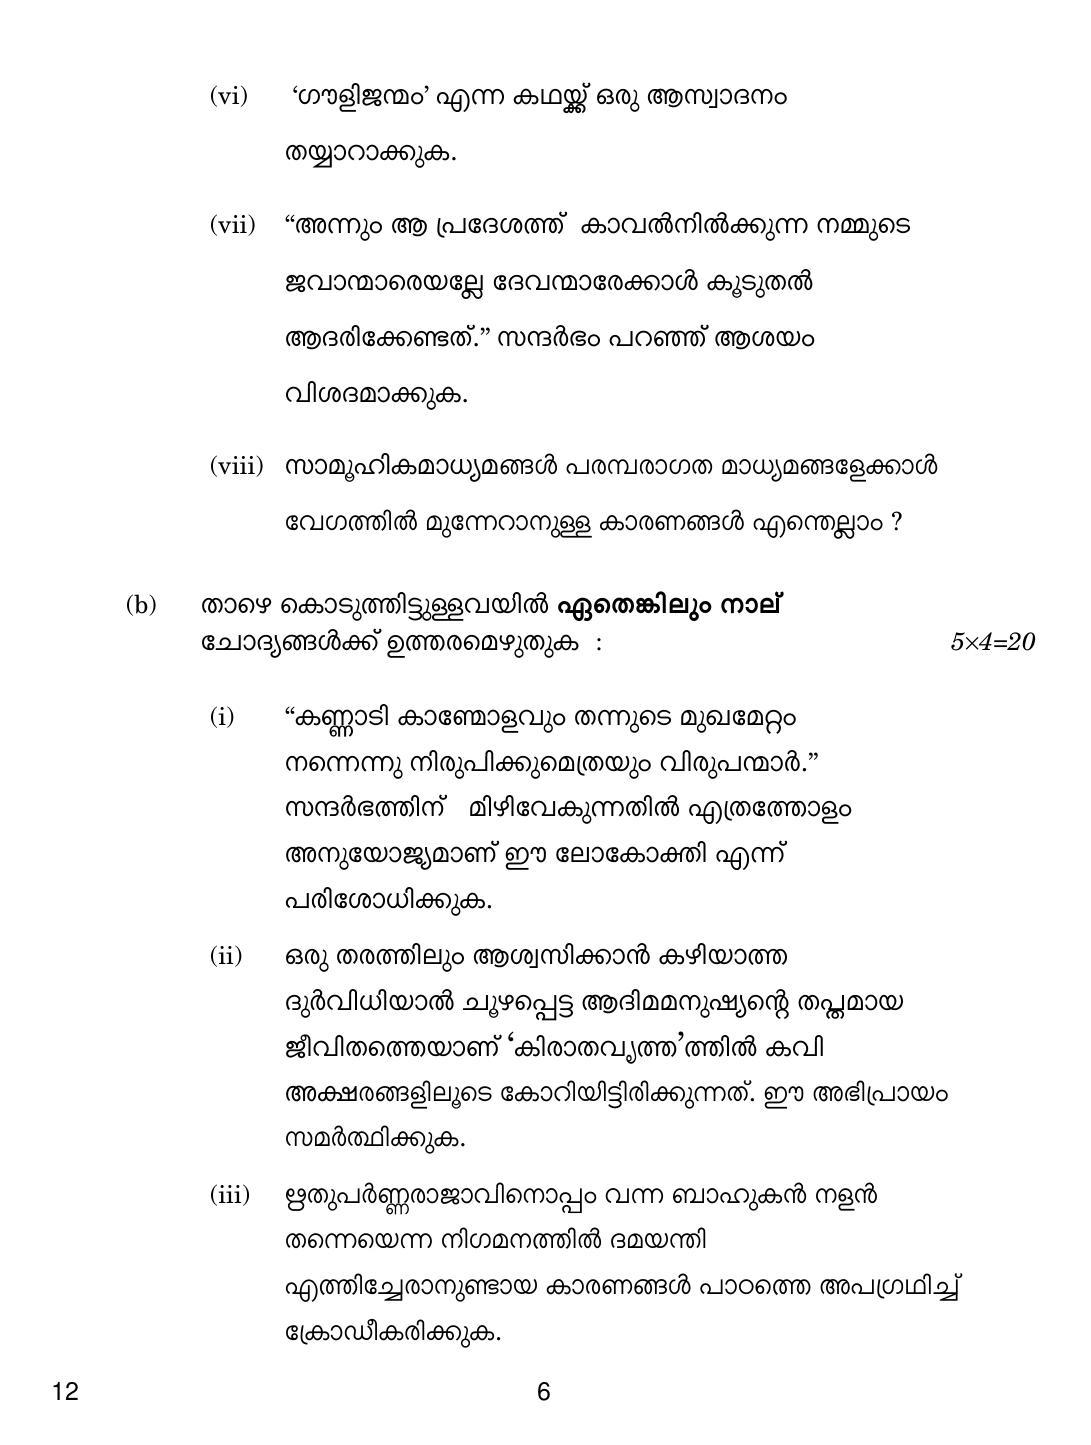 CBSE Class 12 12 Malayalam 2019 Compartment Question Paper - Page 6